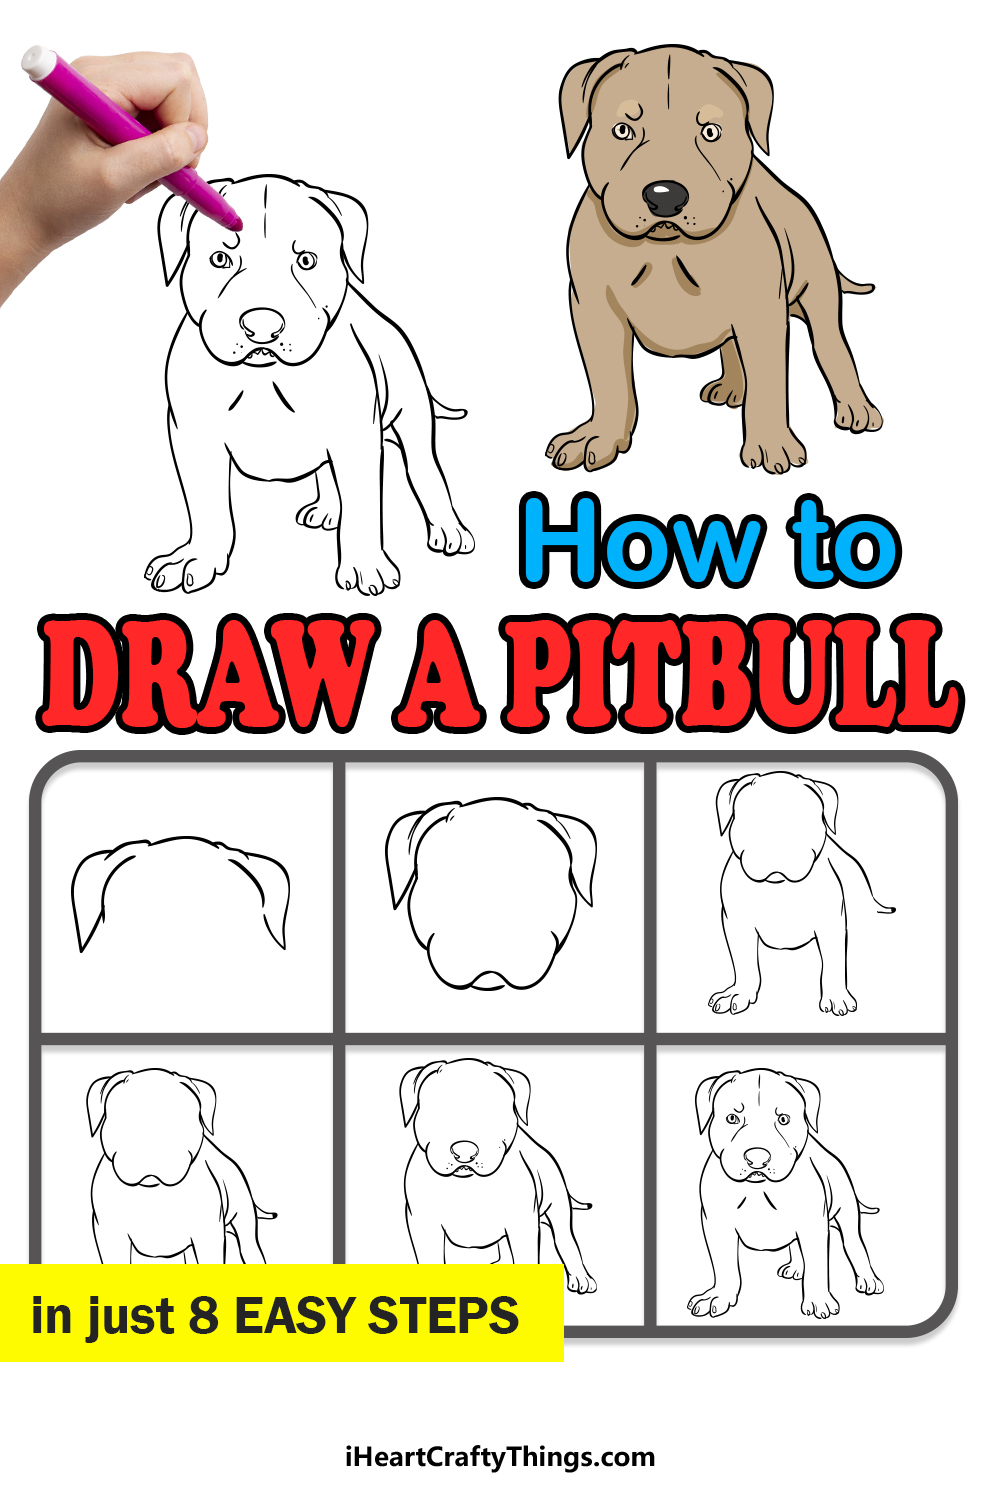 how to draw a pitbull in 8 easy steps